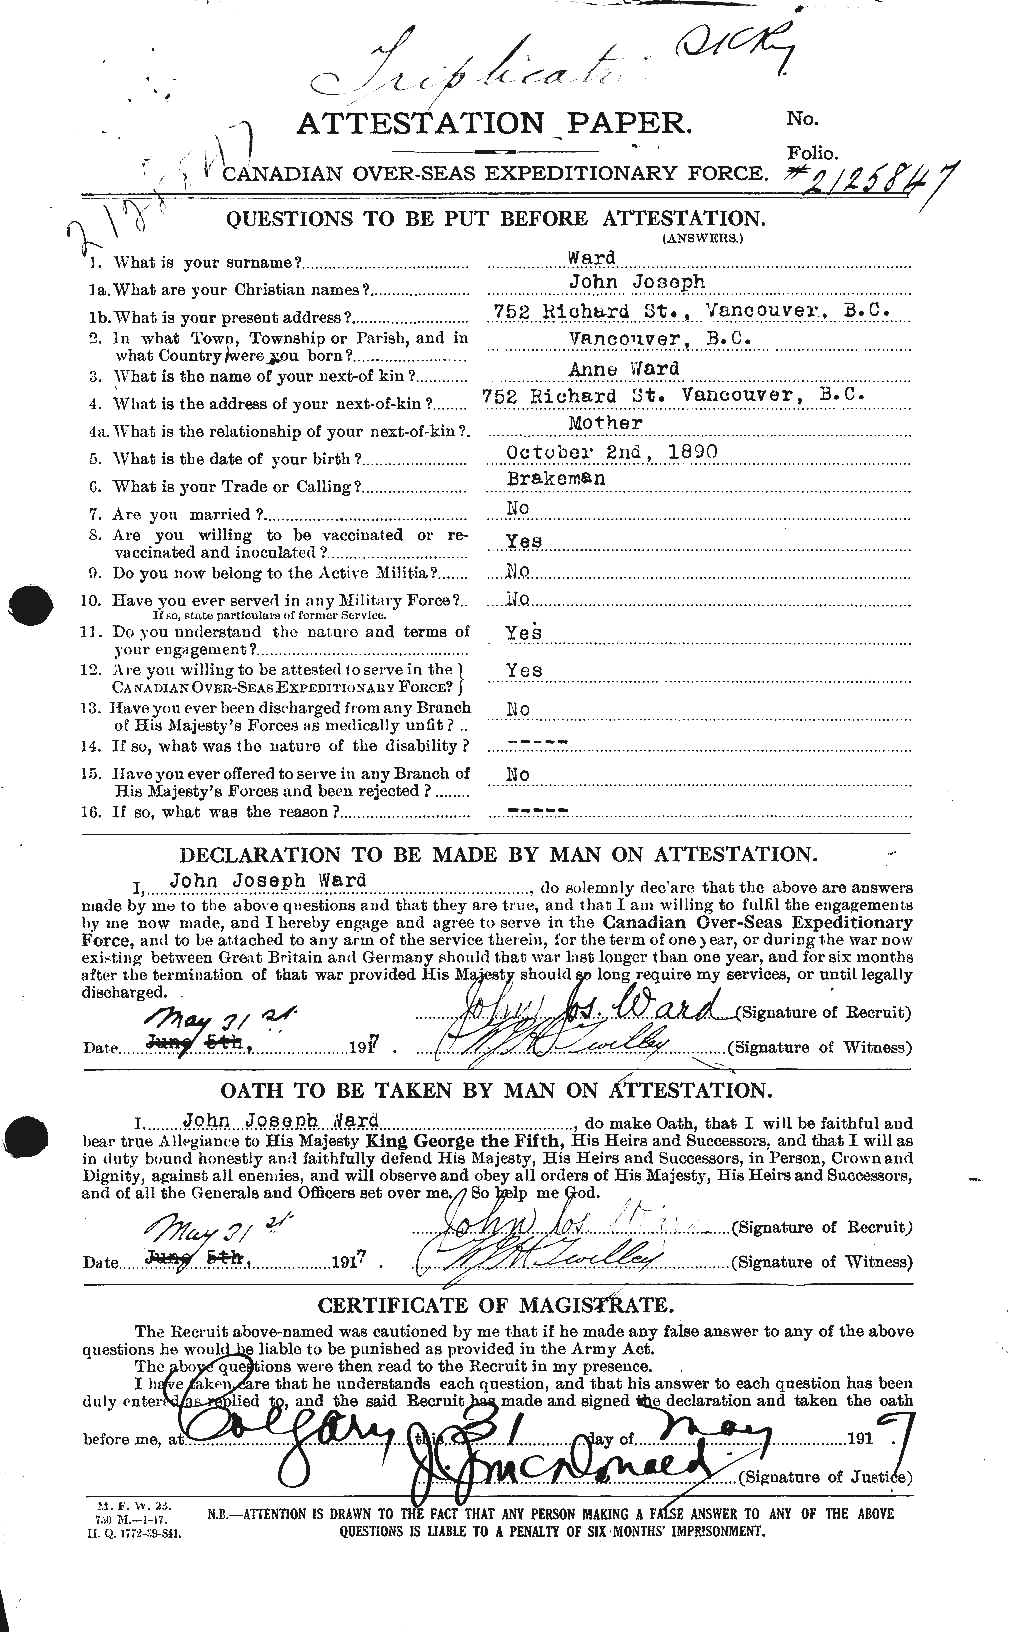 Personnel Records of the First World War - CEF 659529a